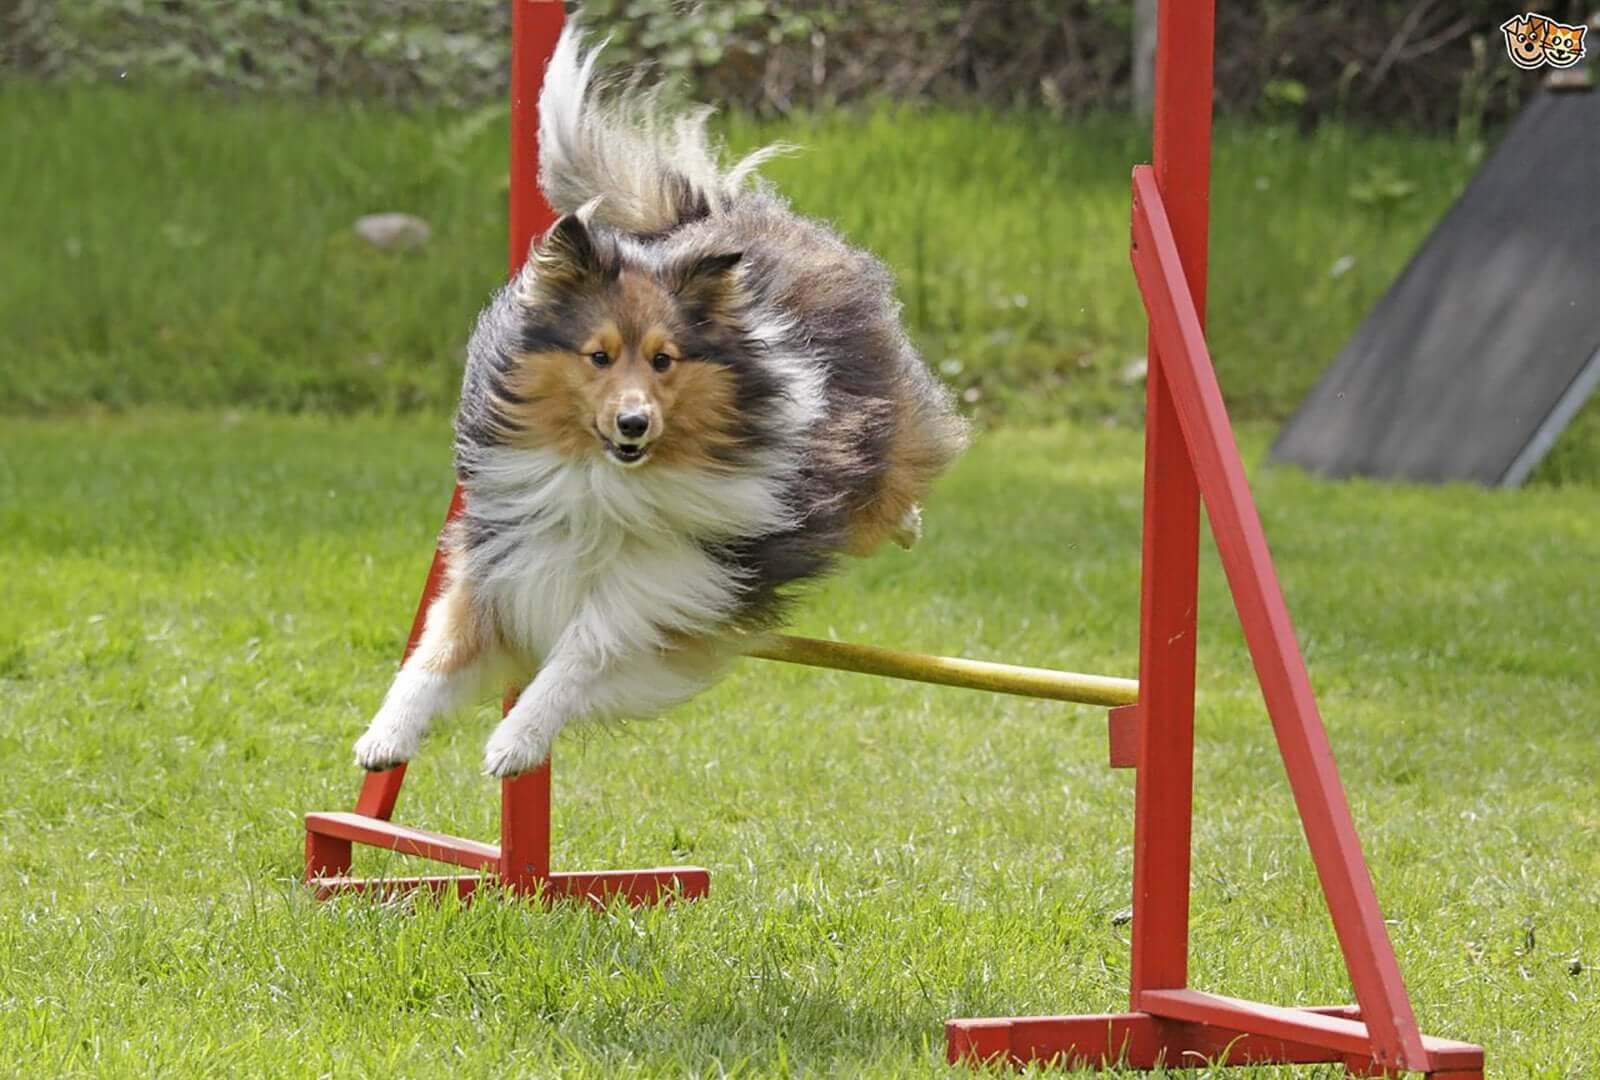 4 Dog Sports To Improve Your Pet's Fitness